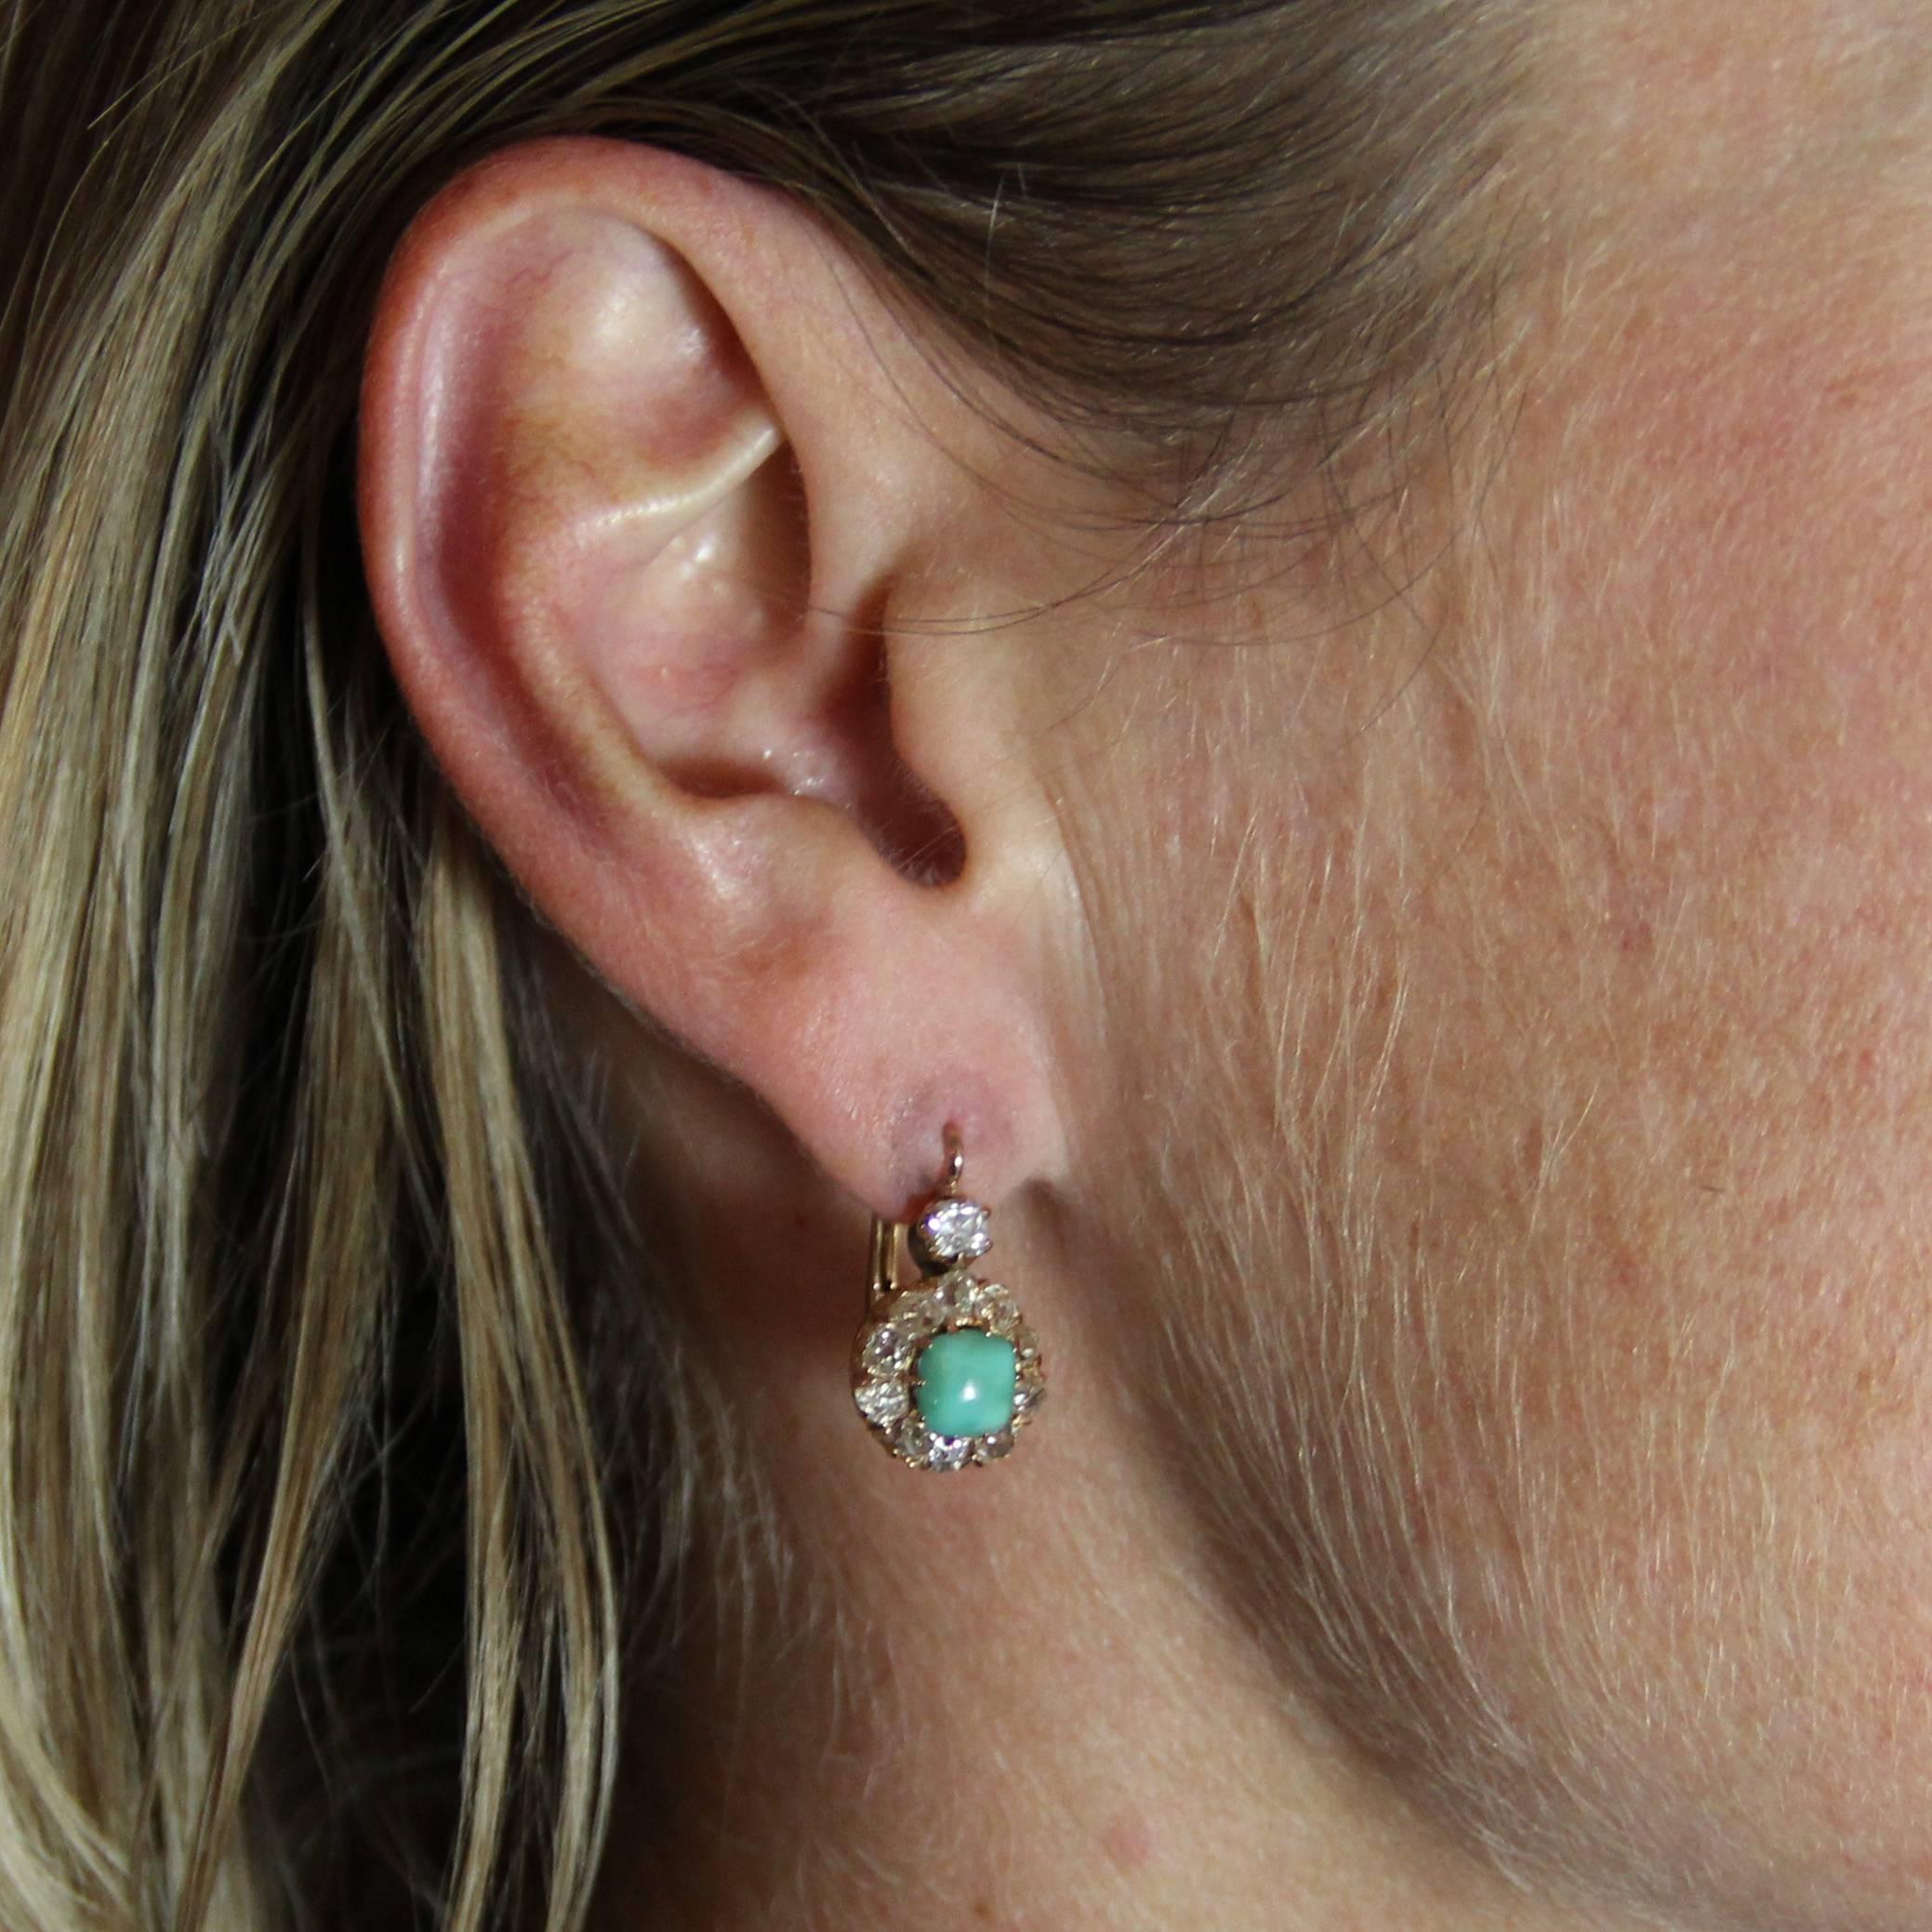 For pierced ears.
Earrings in 14 carats yellow gold, shell hallmark.
Lovely antique earrings, each set with 10 antique brilliant-cut diamonds surrounding a cabochon square shape turquoise, all topped by an antique cushion cut diamond. The clasp